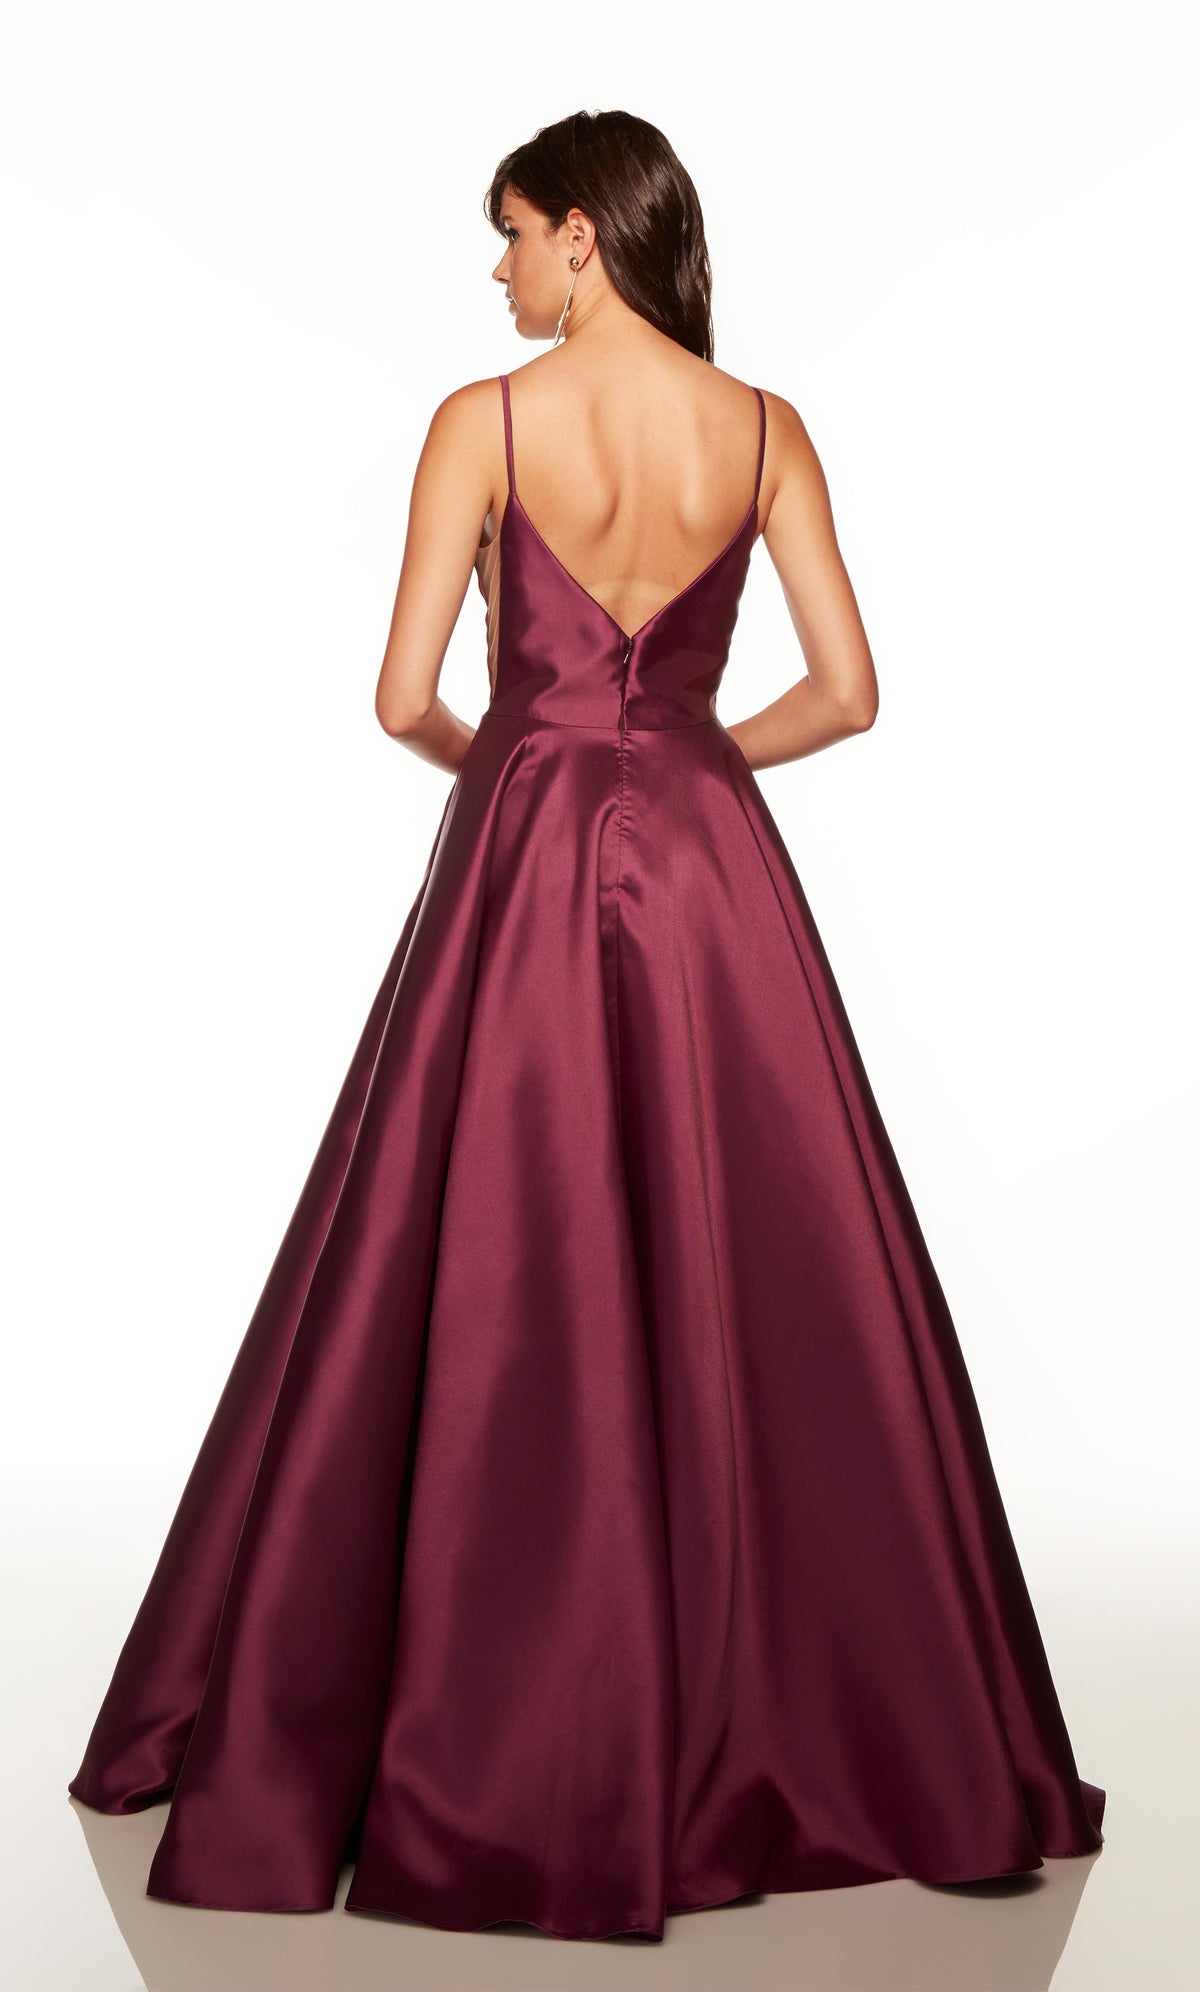 Sweetheart ballgown with a V shaped back and pockets in the color black plum.